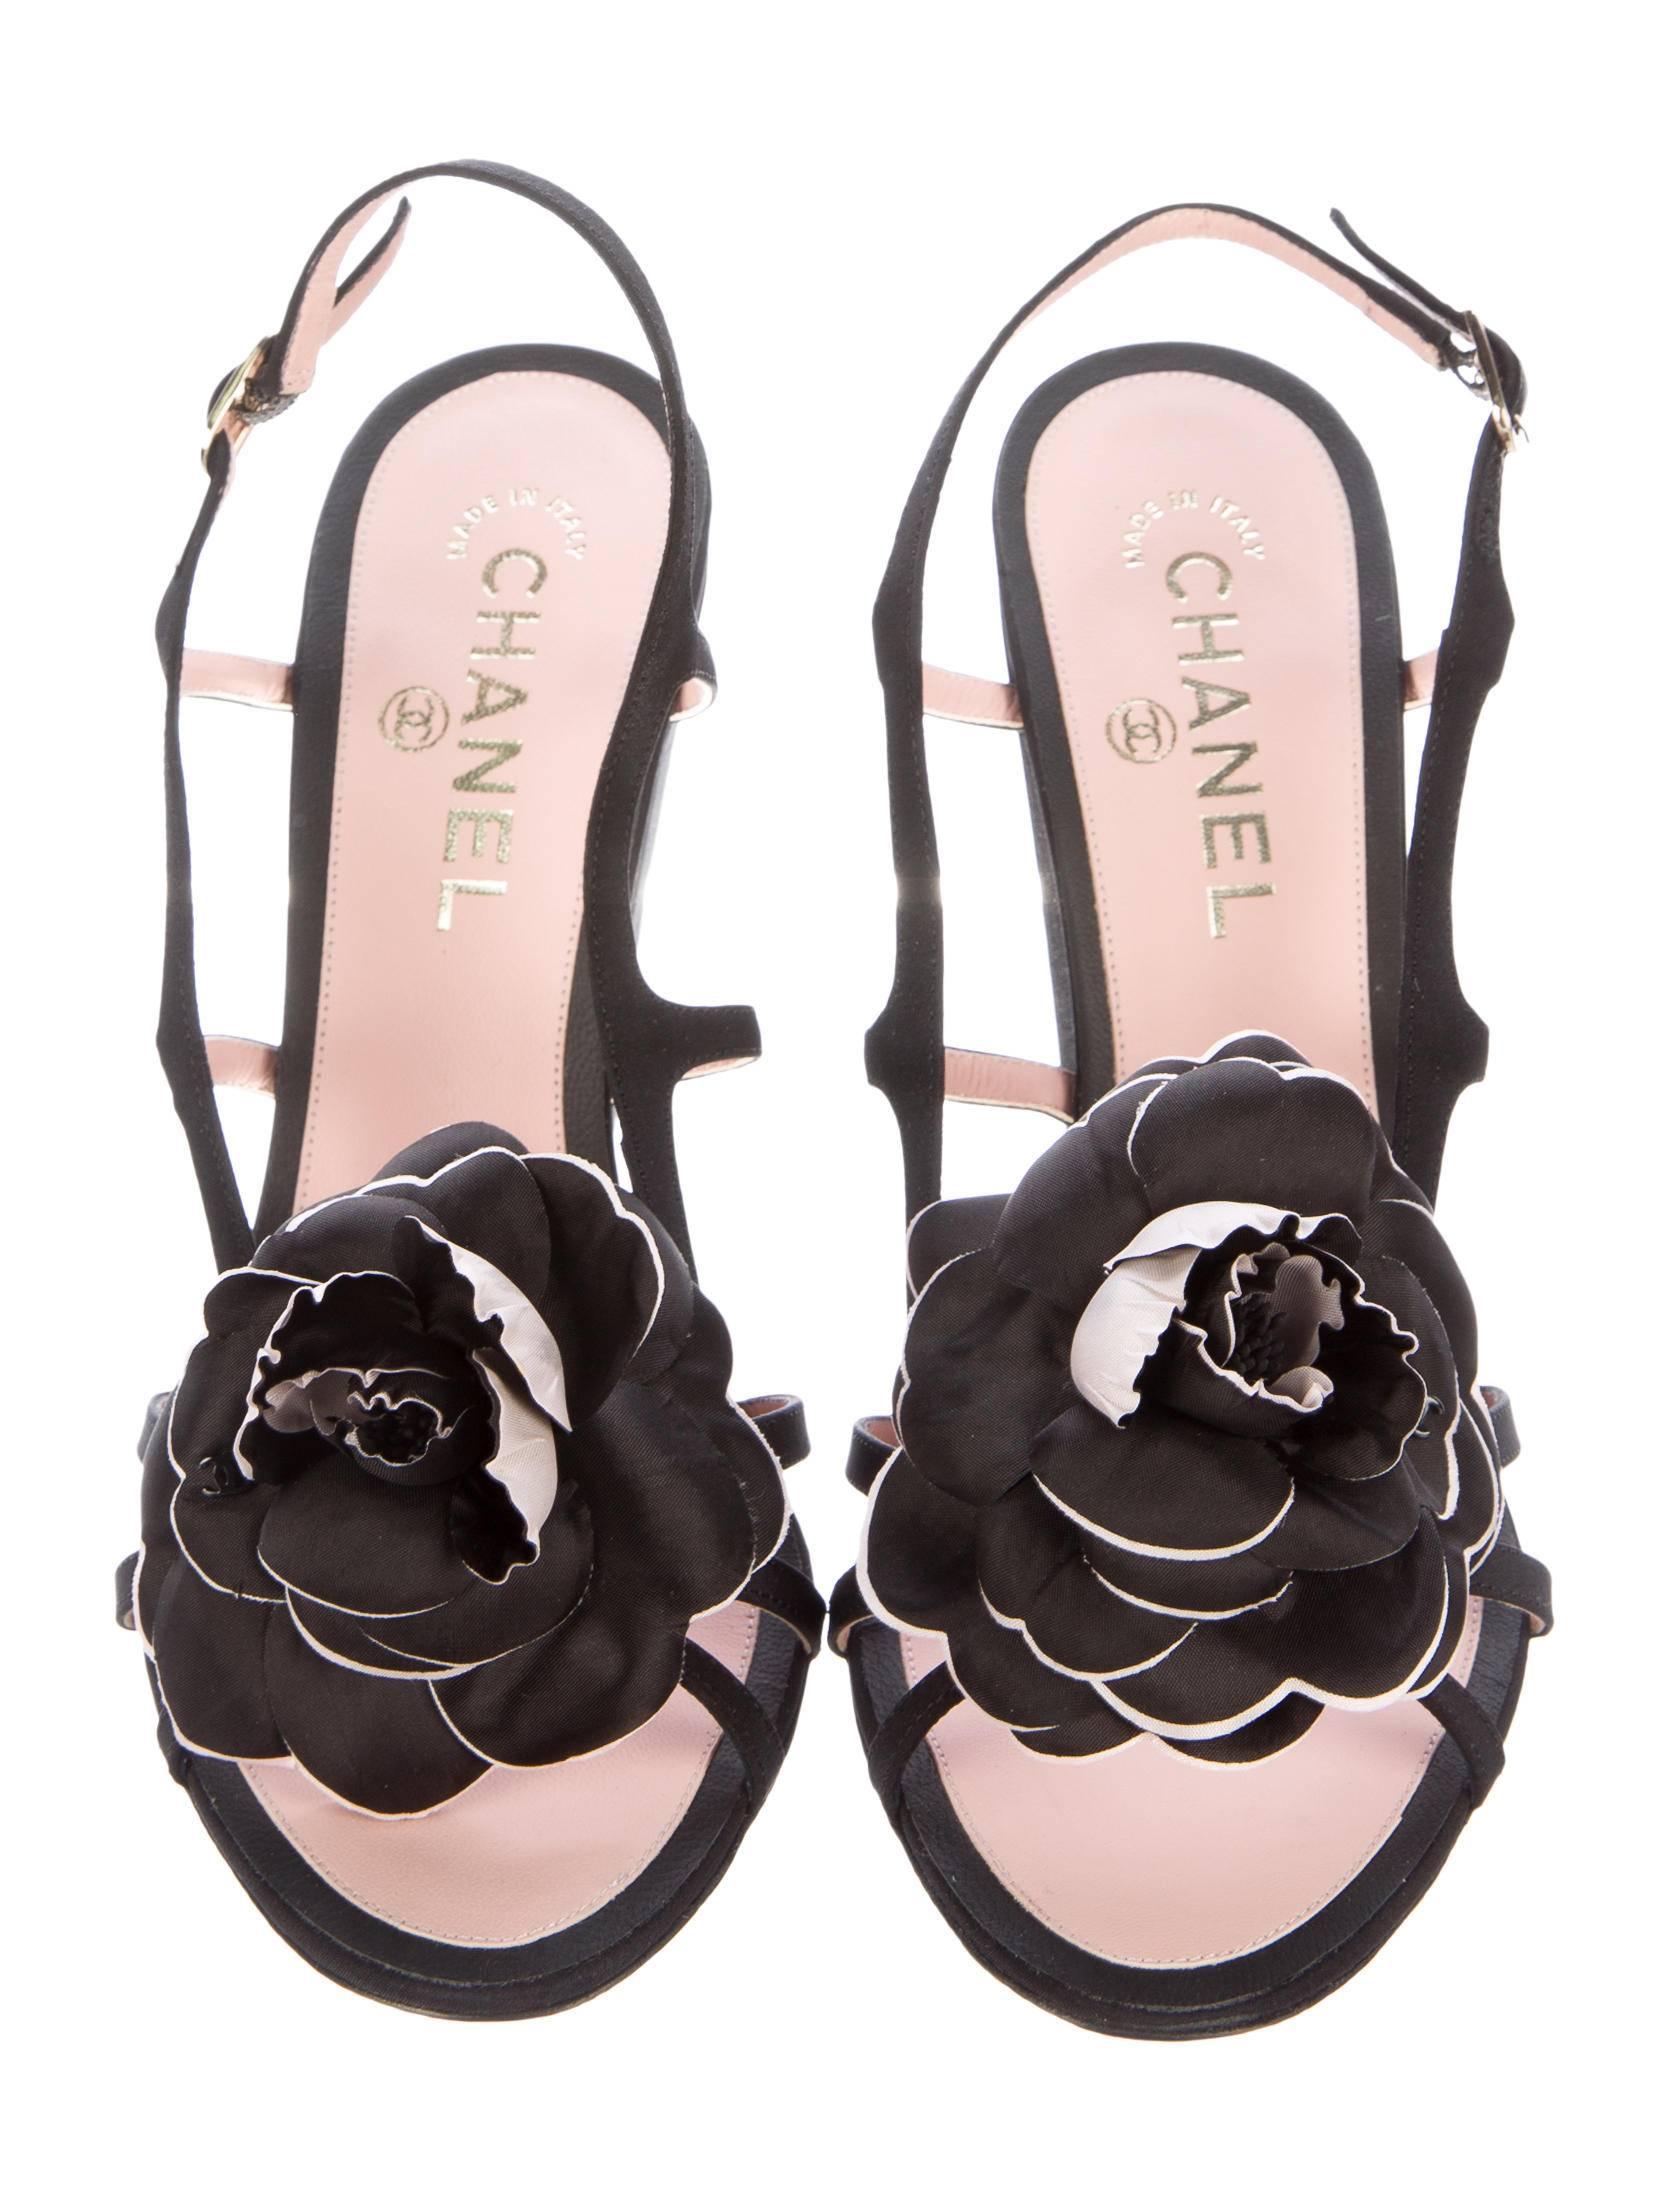 Women's Chanel NEW & SOLD OUT Black Flower Cut Out Wedge Sandals Heels in Box 